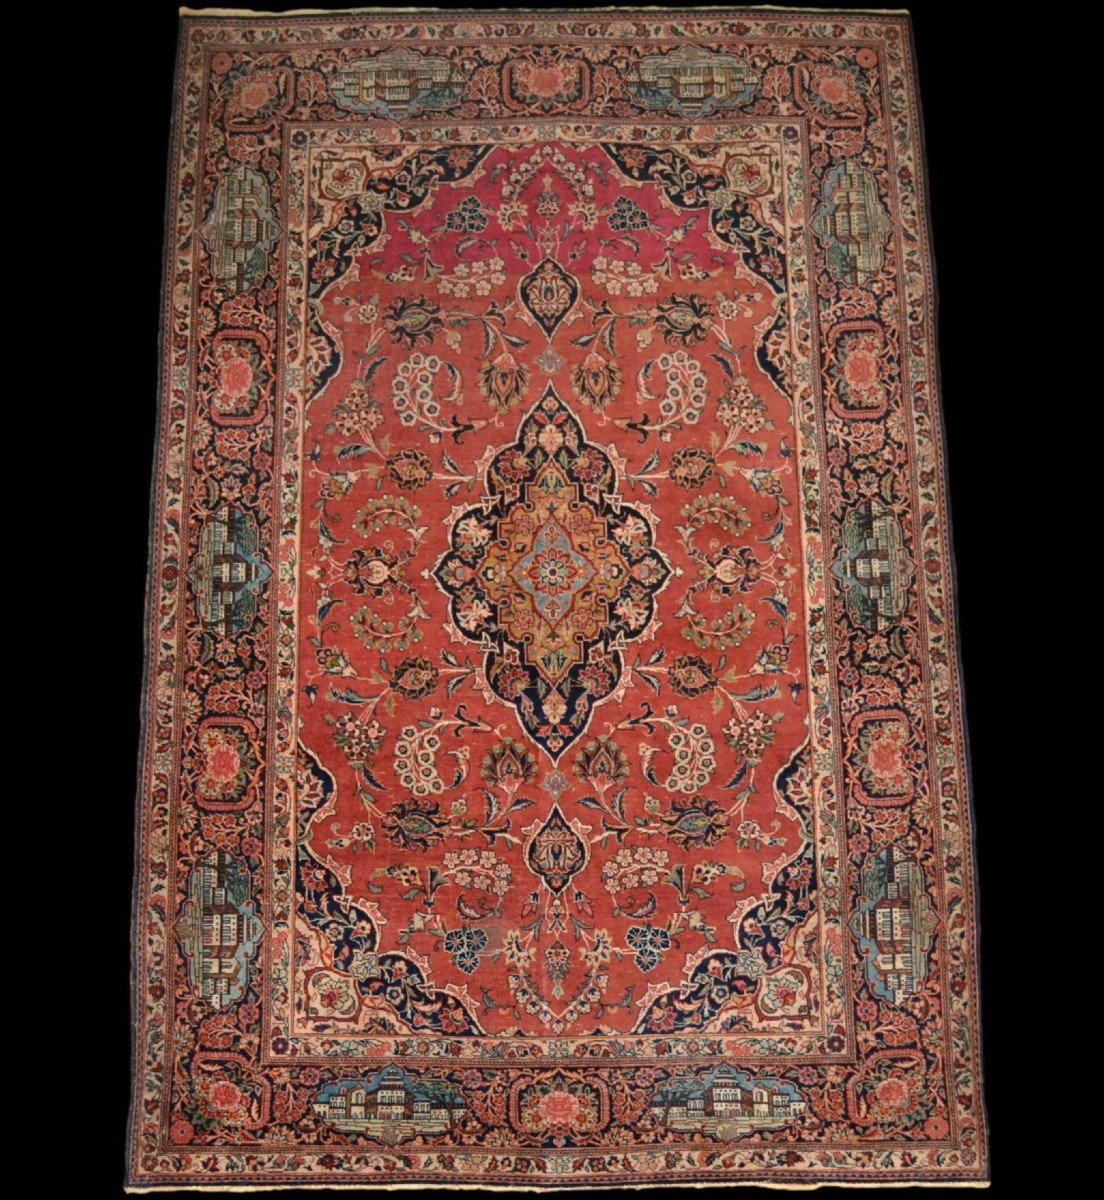 Antique Kashan Rug, 136 X 208 Cm, Hand-knotted Wool And Silk, Persia, (iran) Mid-19th Century